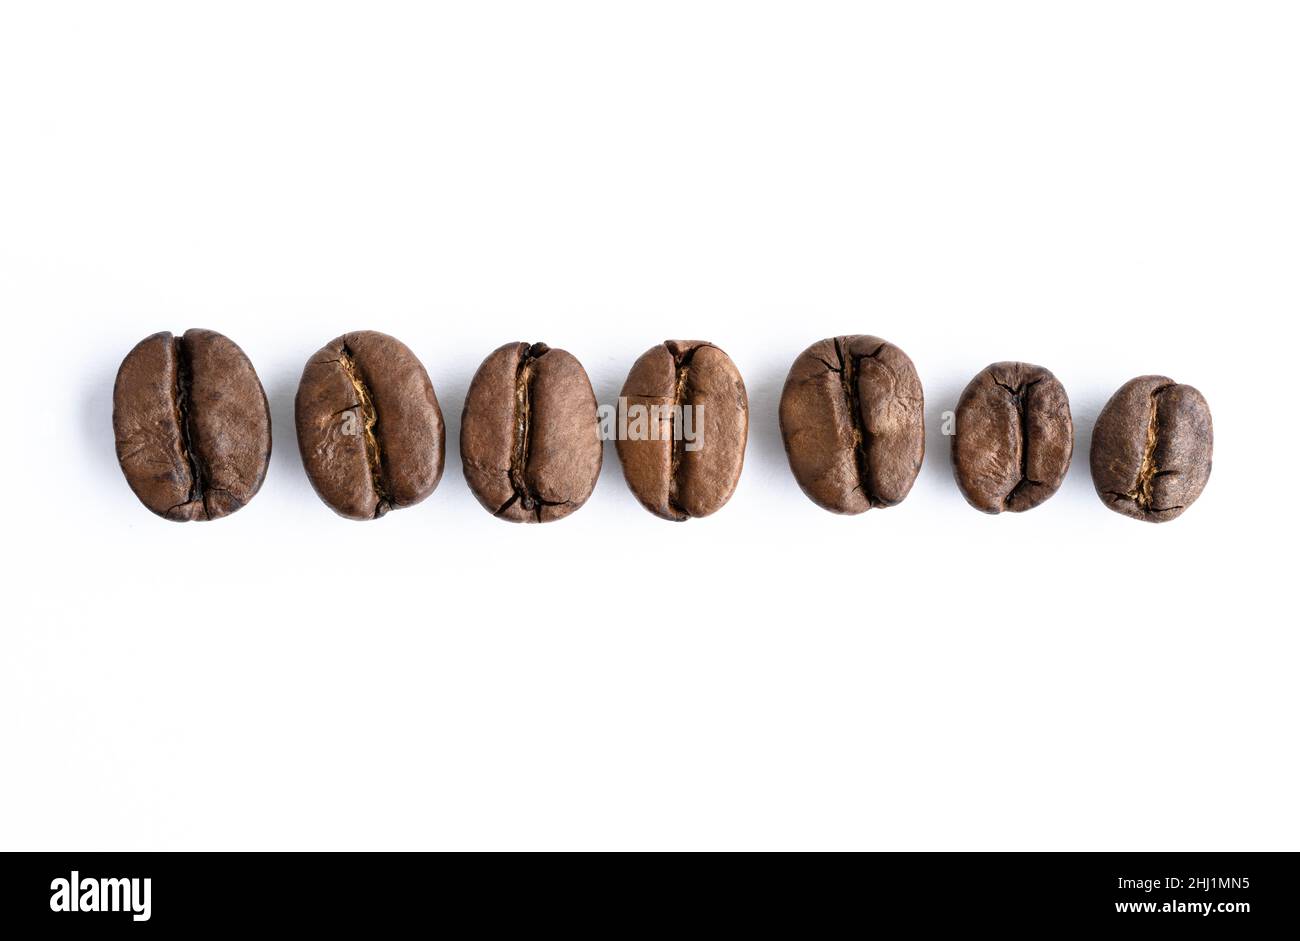 Сoffee beans isolated on white background Stock Photo